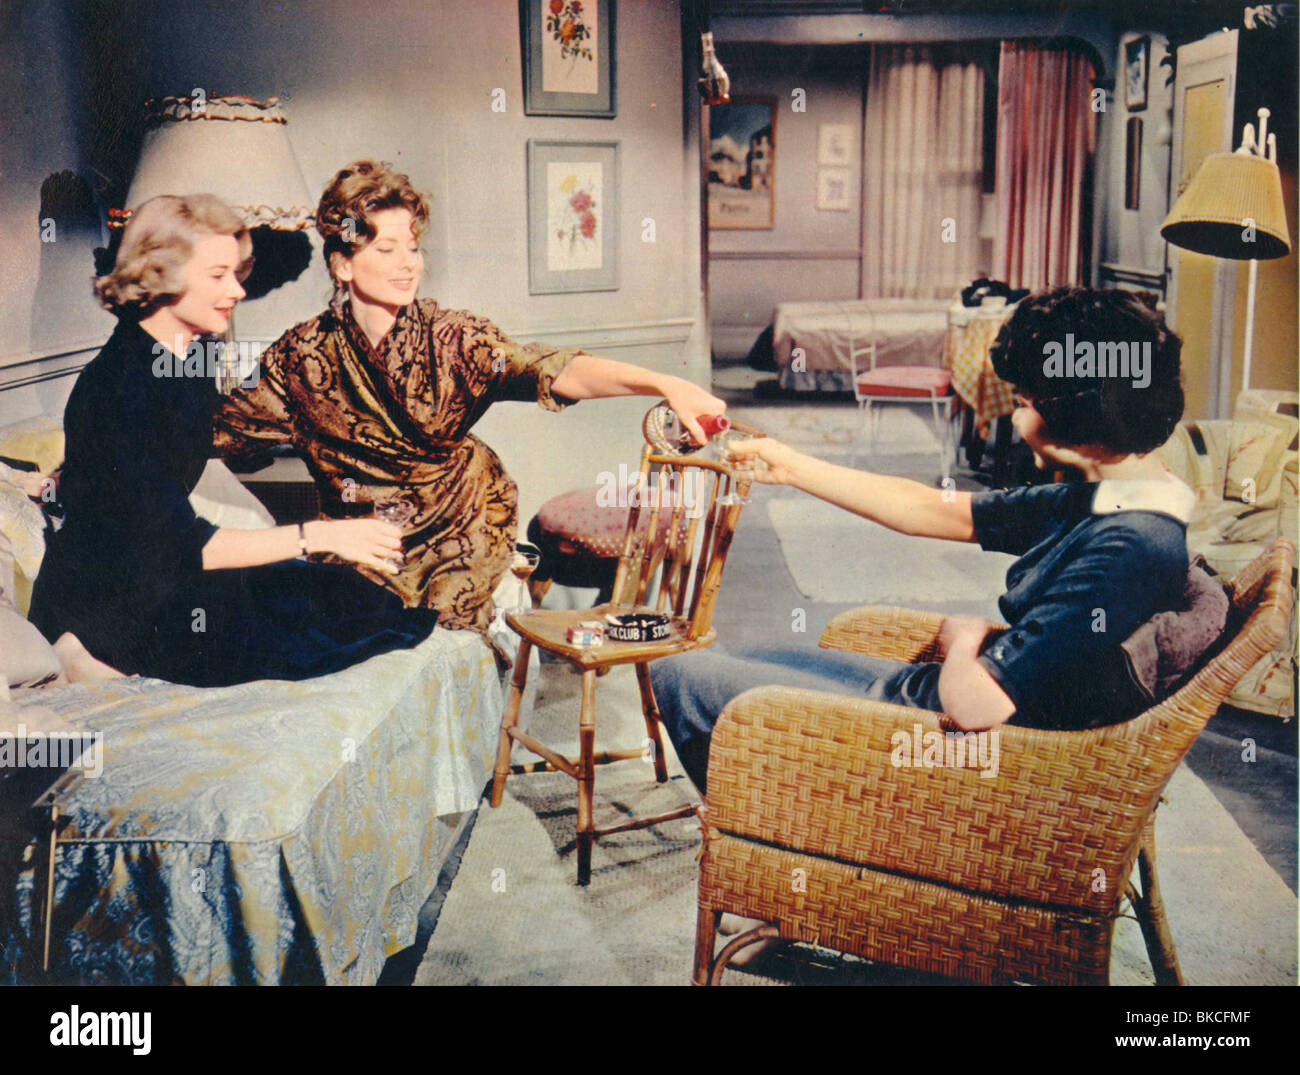 THE BEST OF EVERYTHING (1959) HOPE LANGE, SUZY PARKER BOET 004FOH Stock Photo